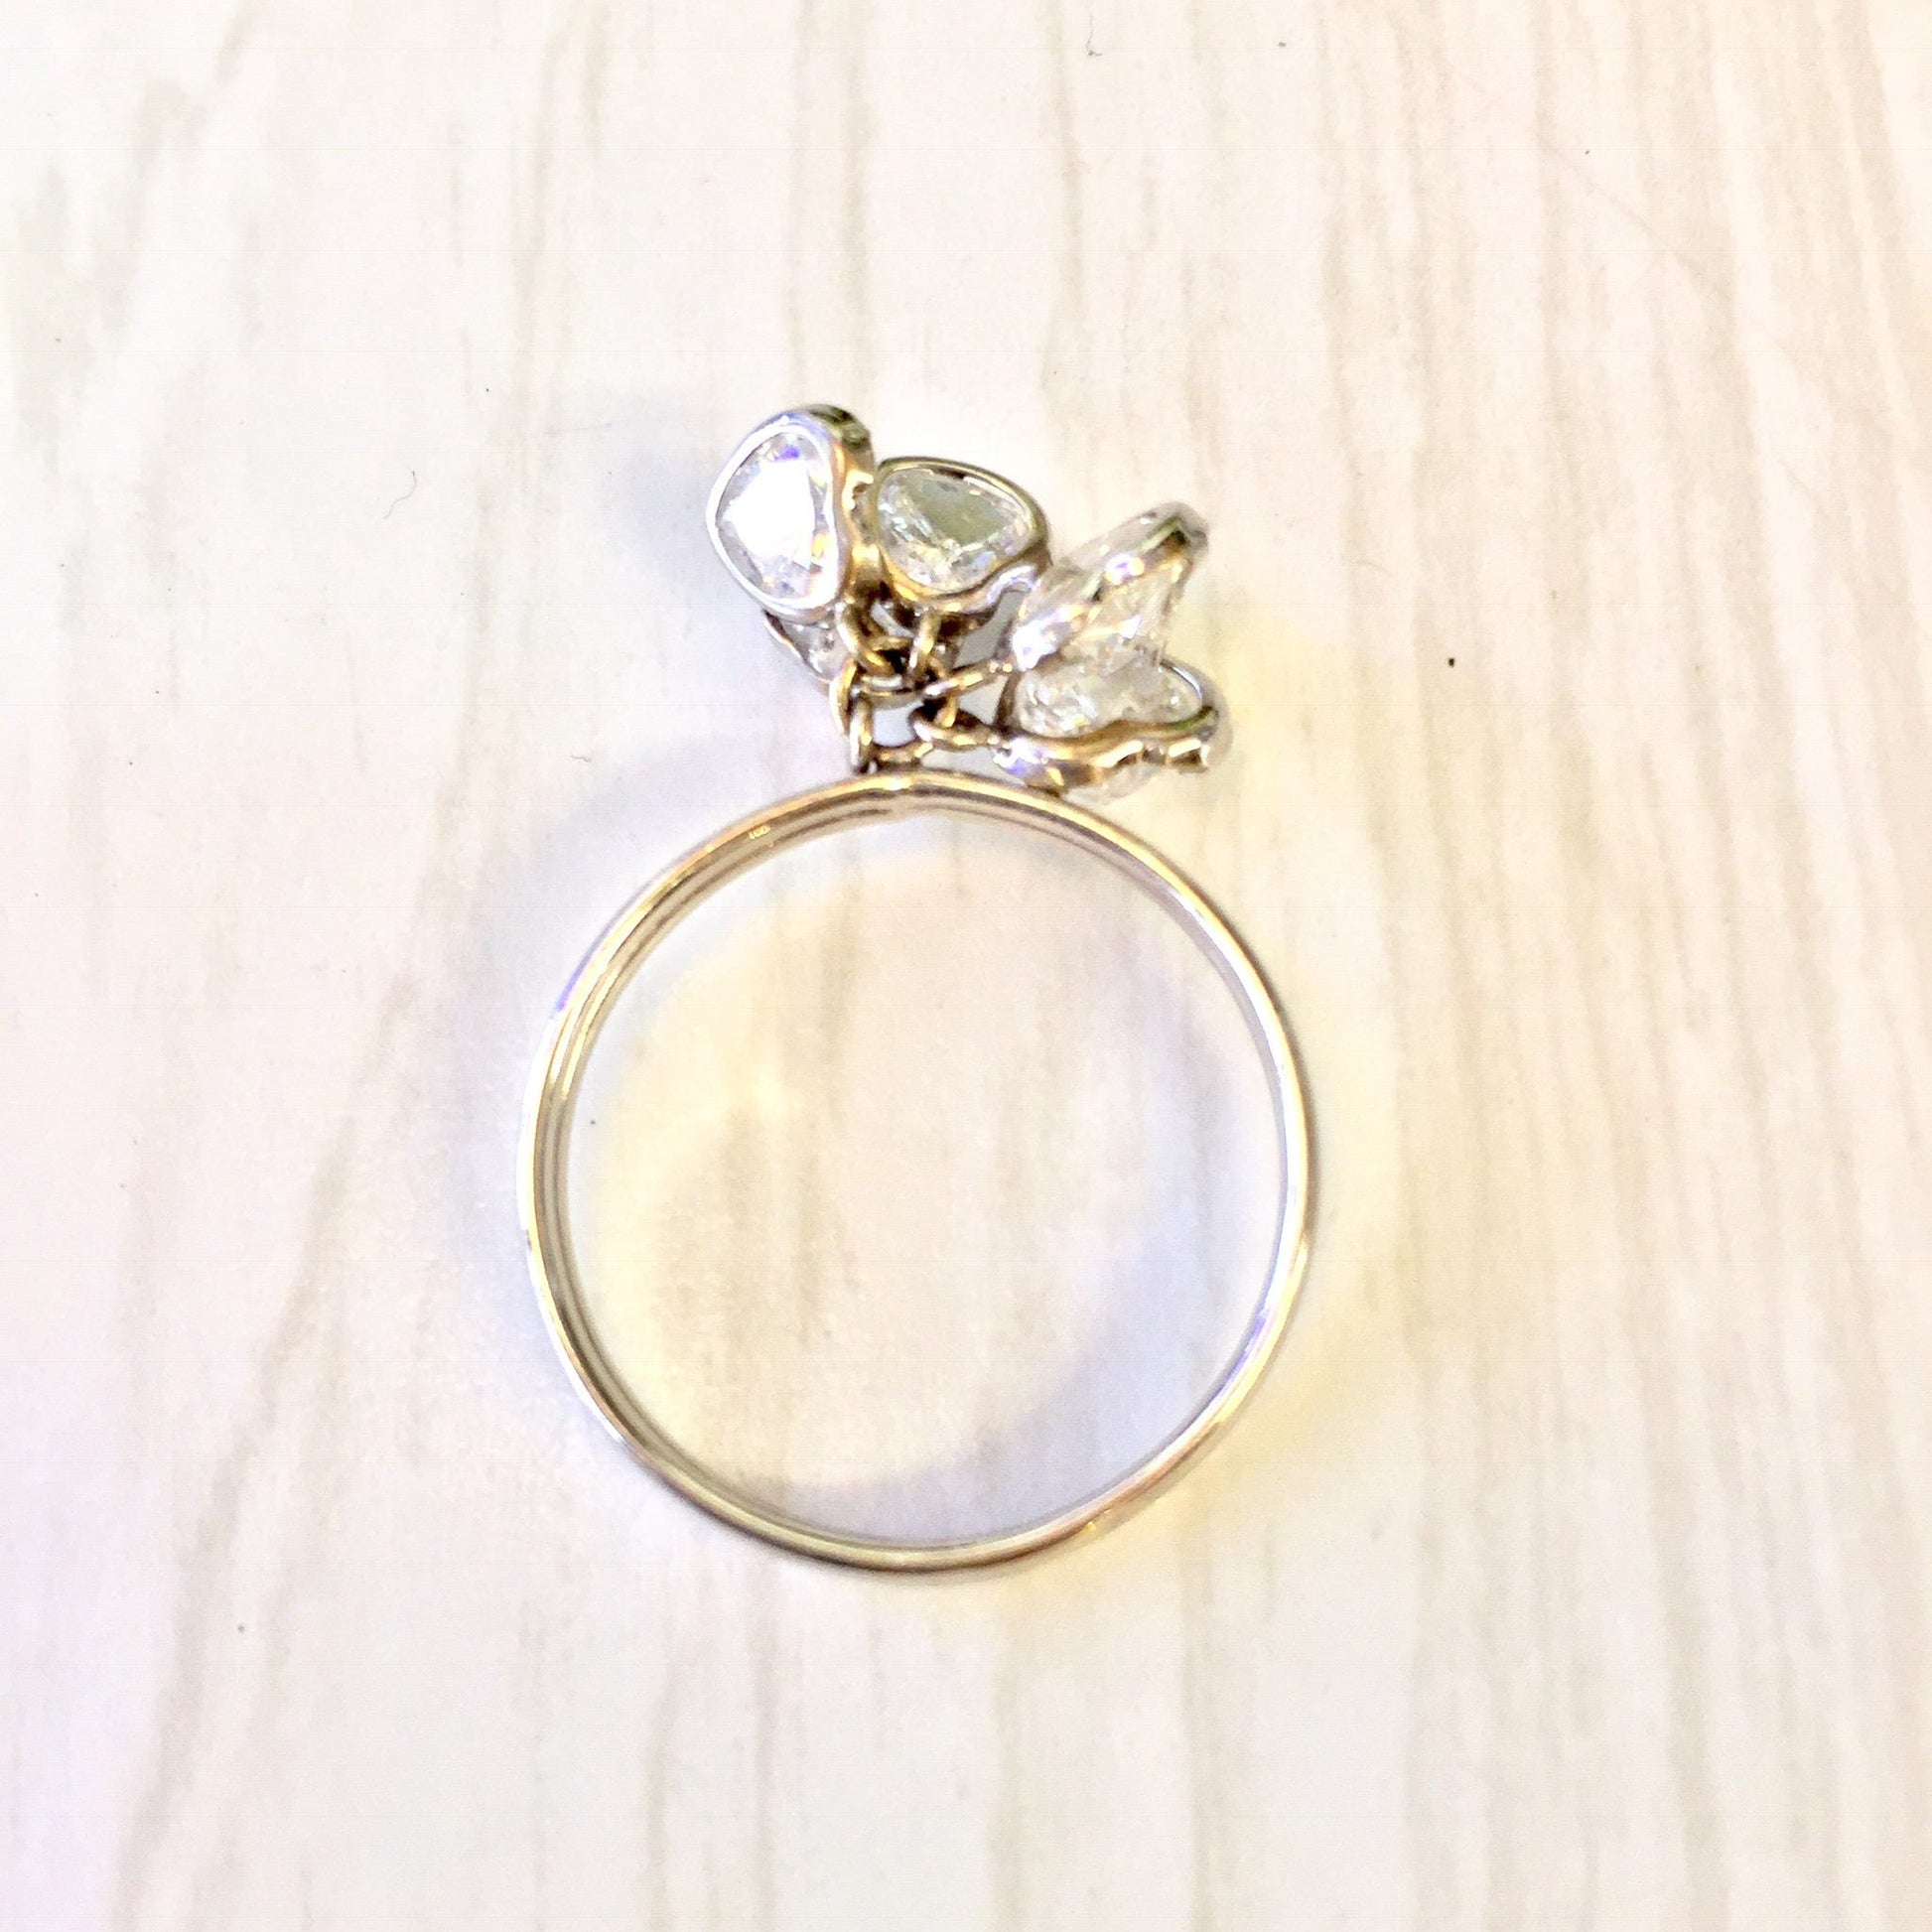 14 karat white gold ring with dangling heart charm adorned with sparkling cubic zirconia stones on a light wood background, perfect holiday gift idea for her.